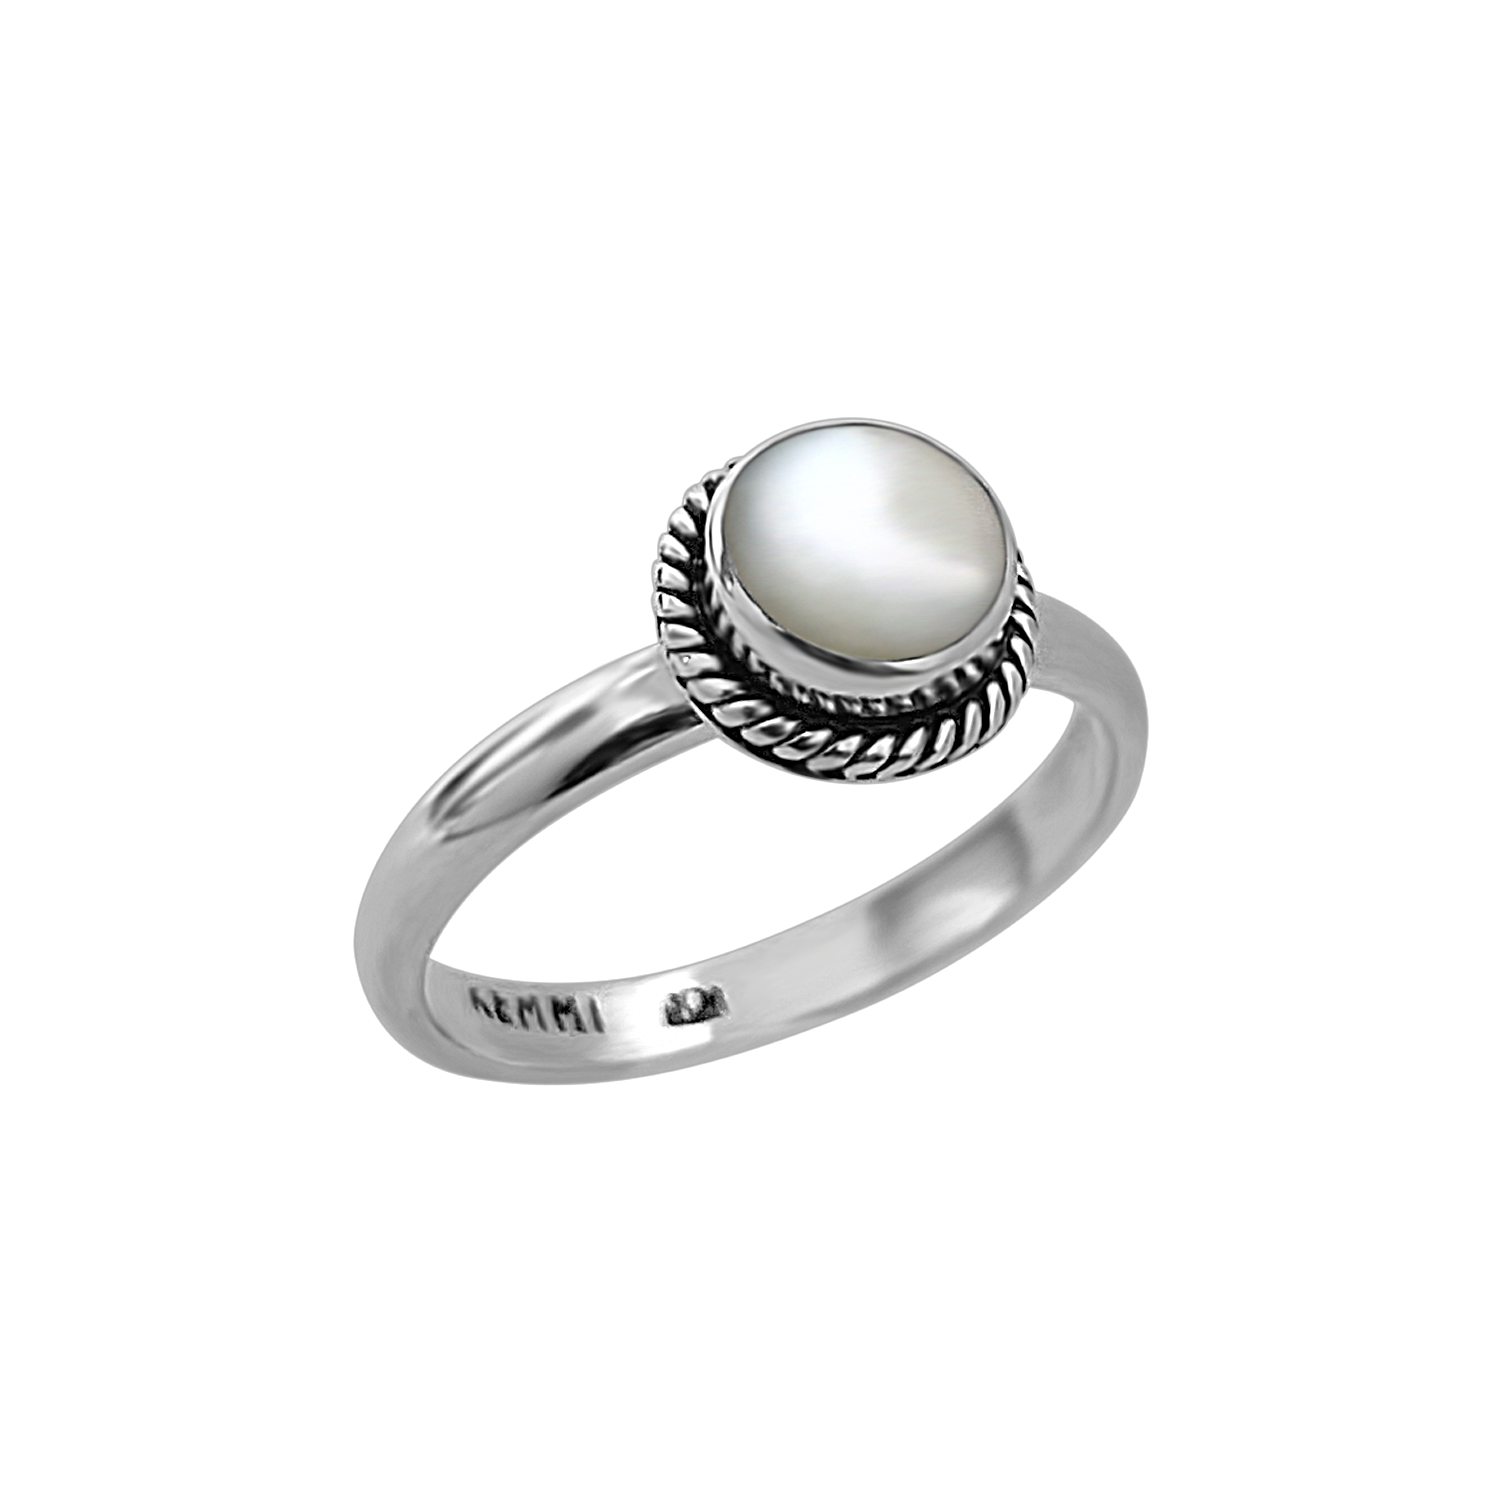 sterling silver band mother of pearl ring kemmi jewelry bohemian classic style